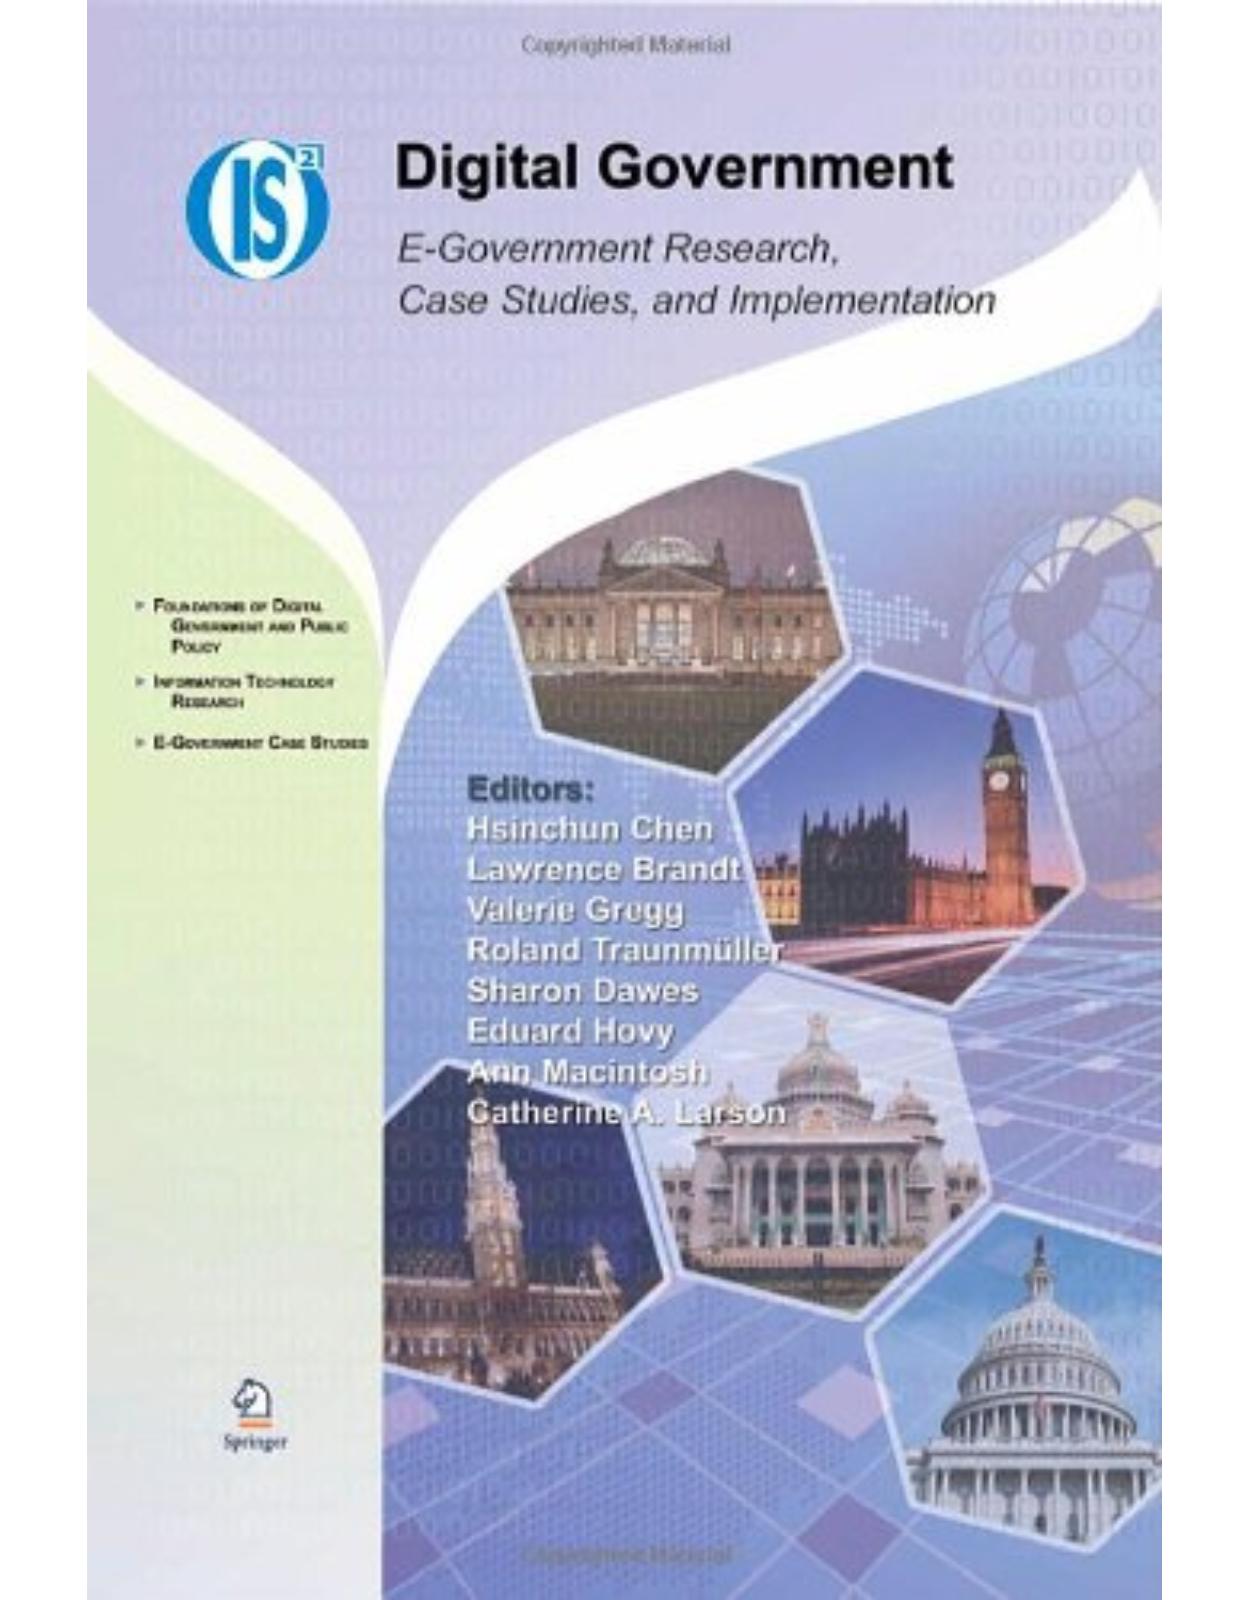 Digital Government: E-Government Research, Case Studies, and Implementation (Integrated Series in Information Systems)